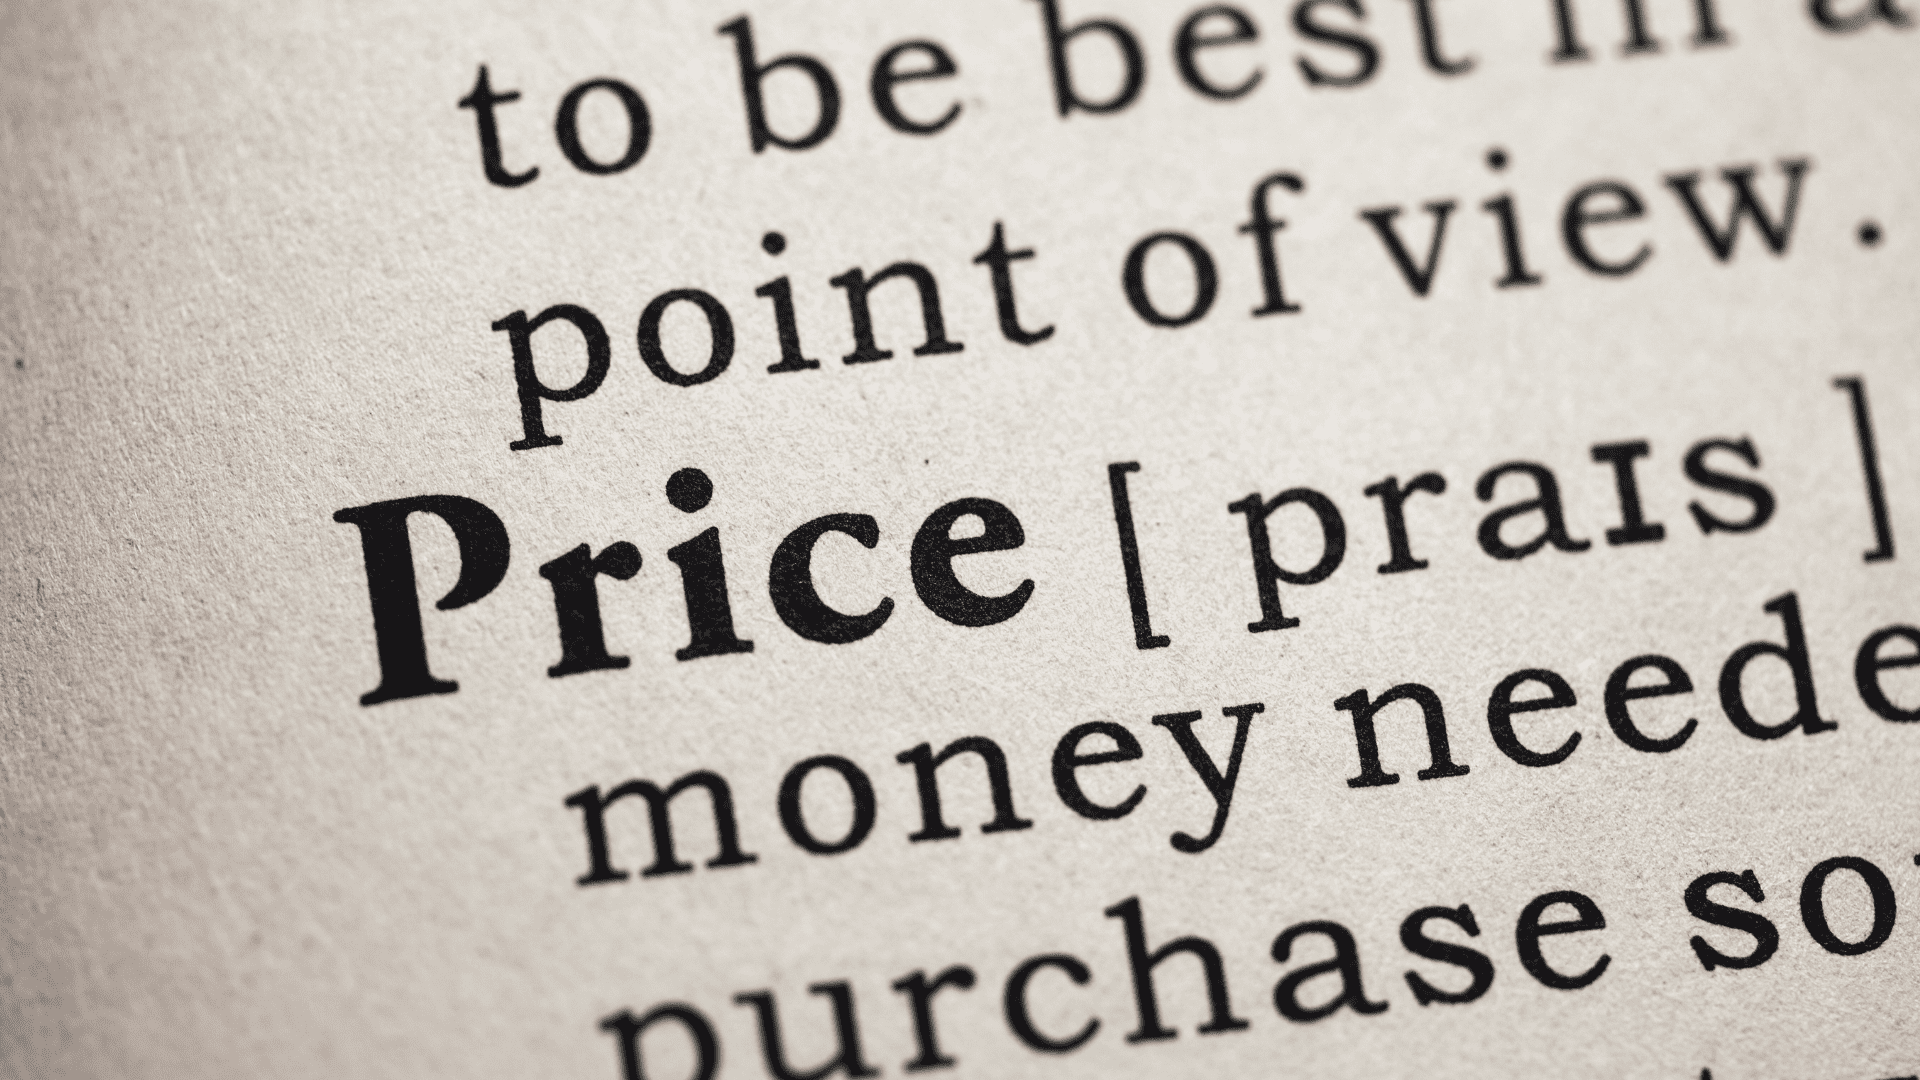 What is Captive Product Pricing